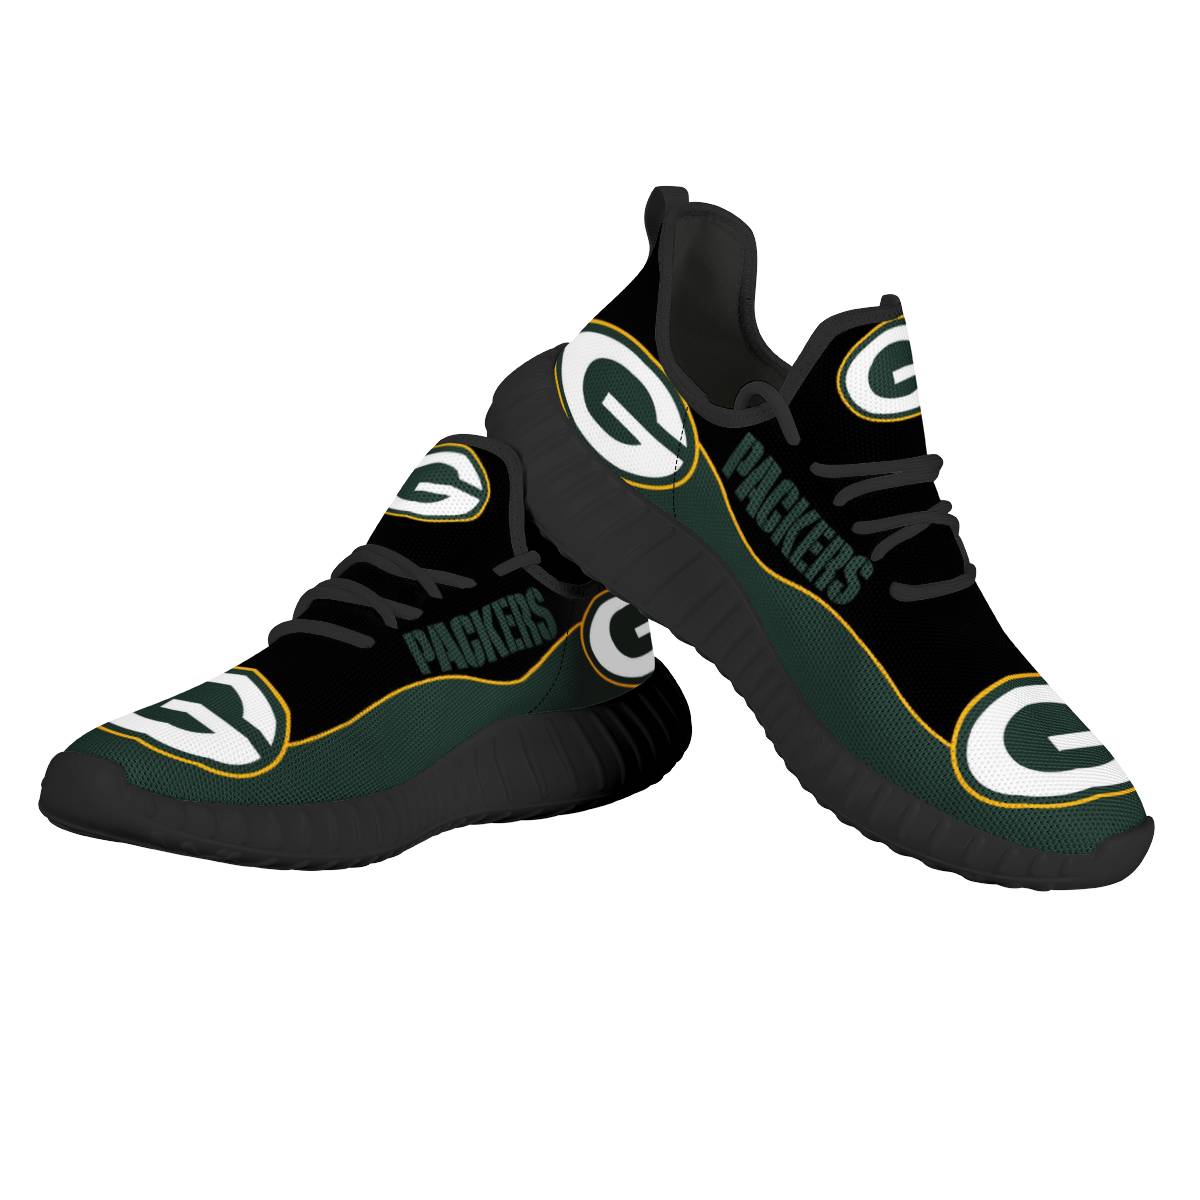 Women's NFL Green Bay Packers Mesh Knit Sneakers/Shoes 003